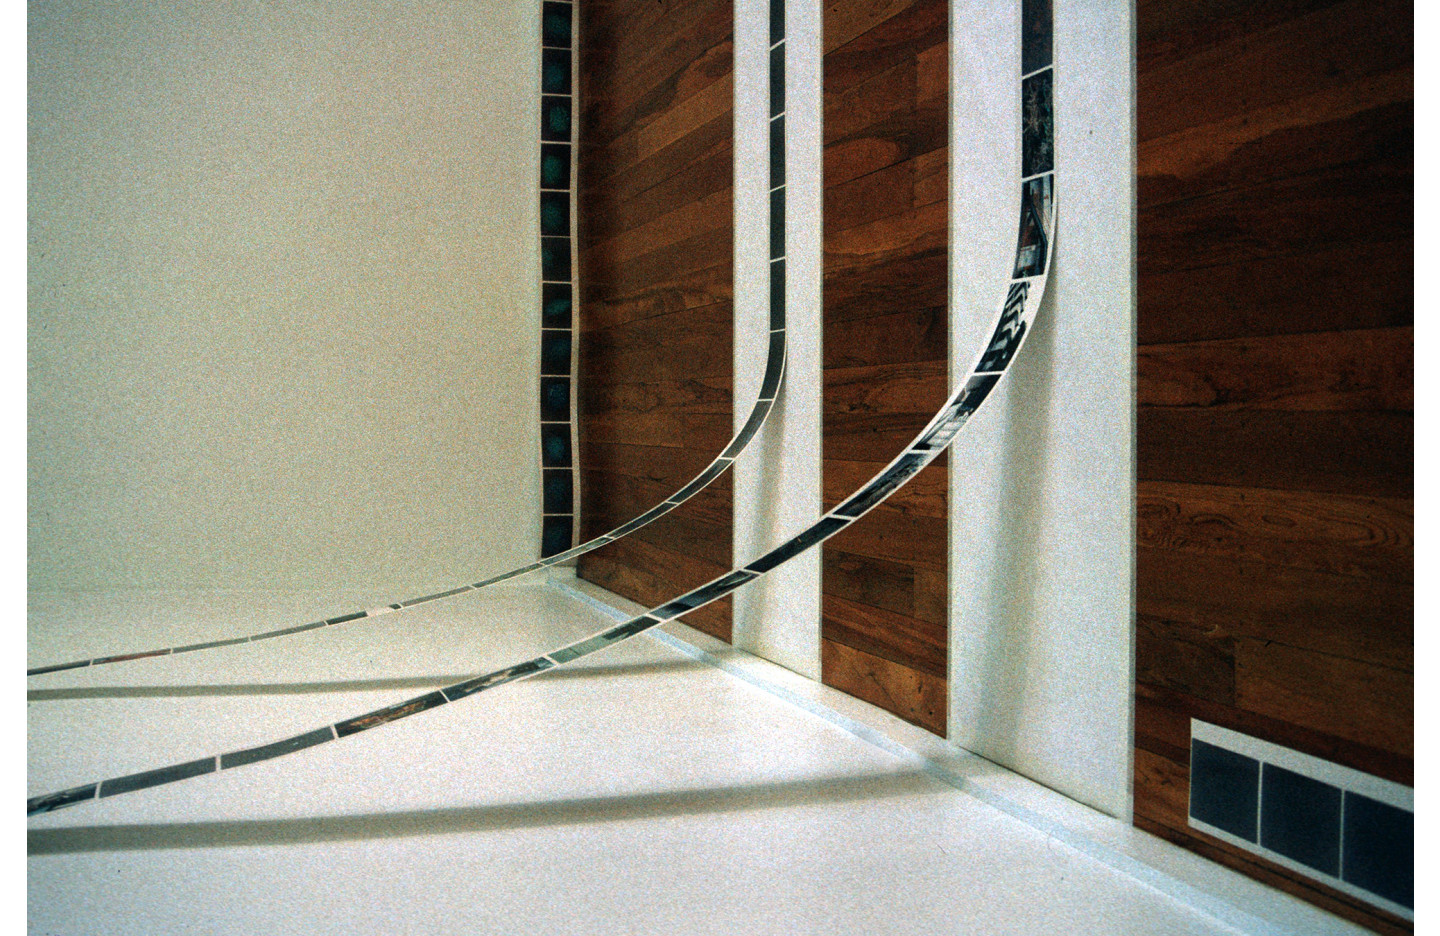 Disposable, Ramp Gallery (2001)